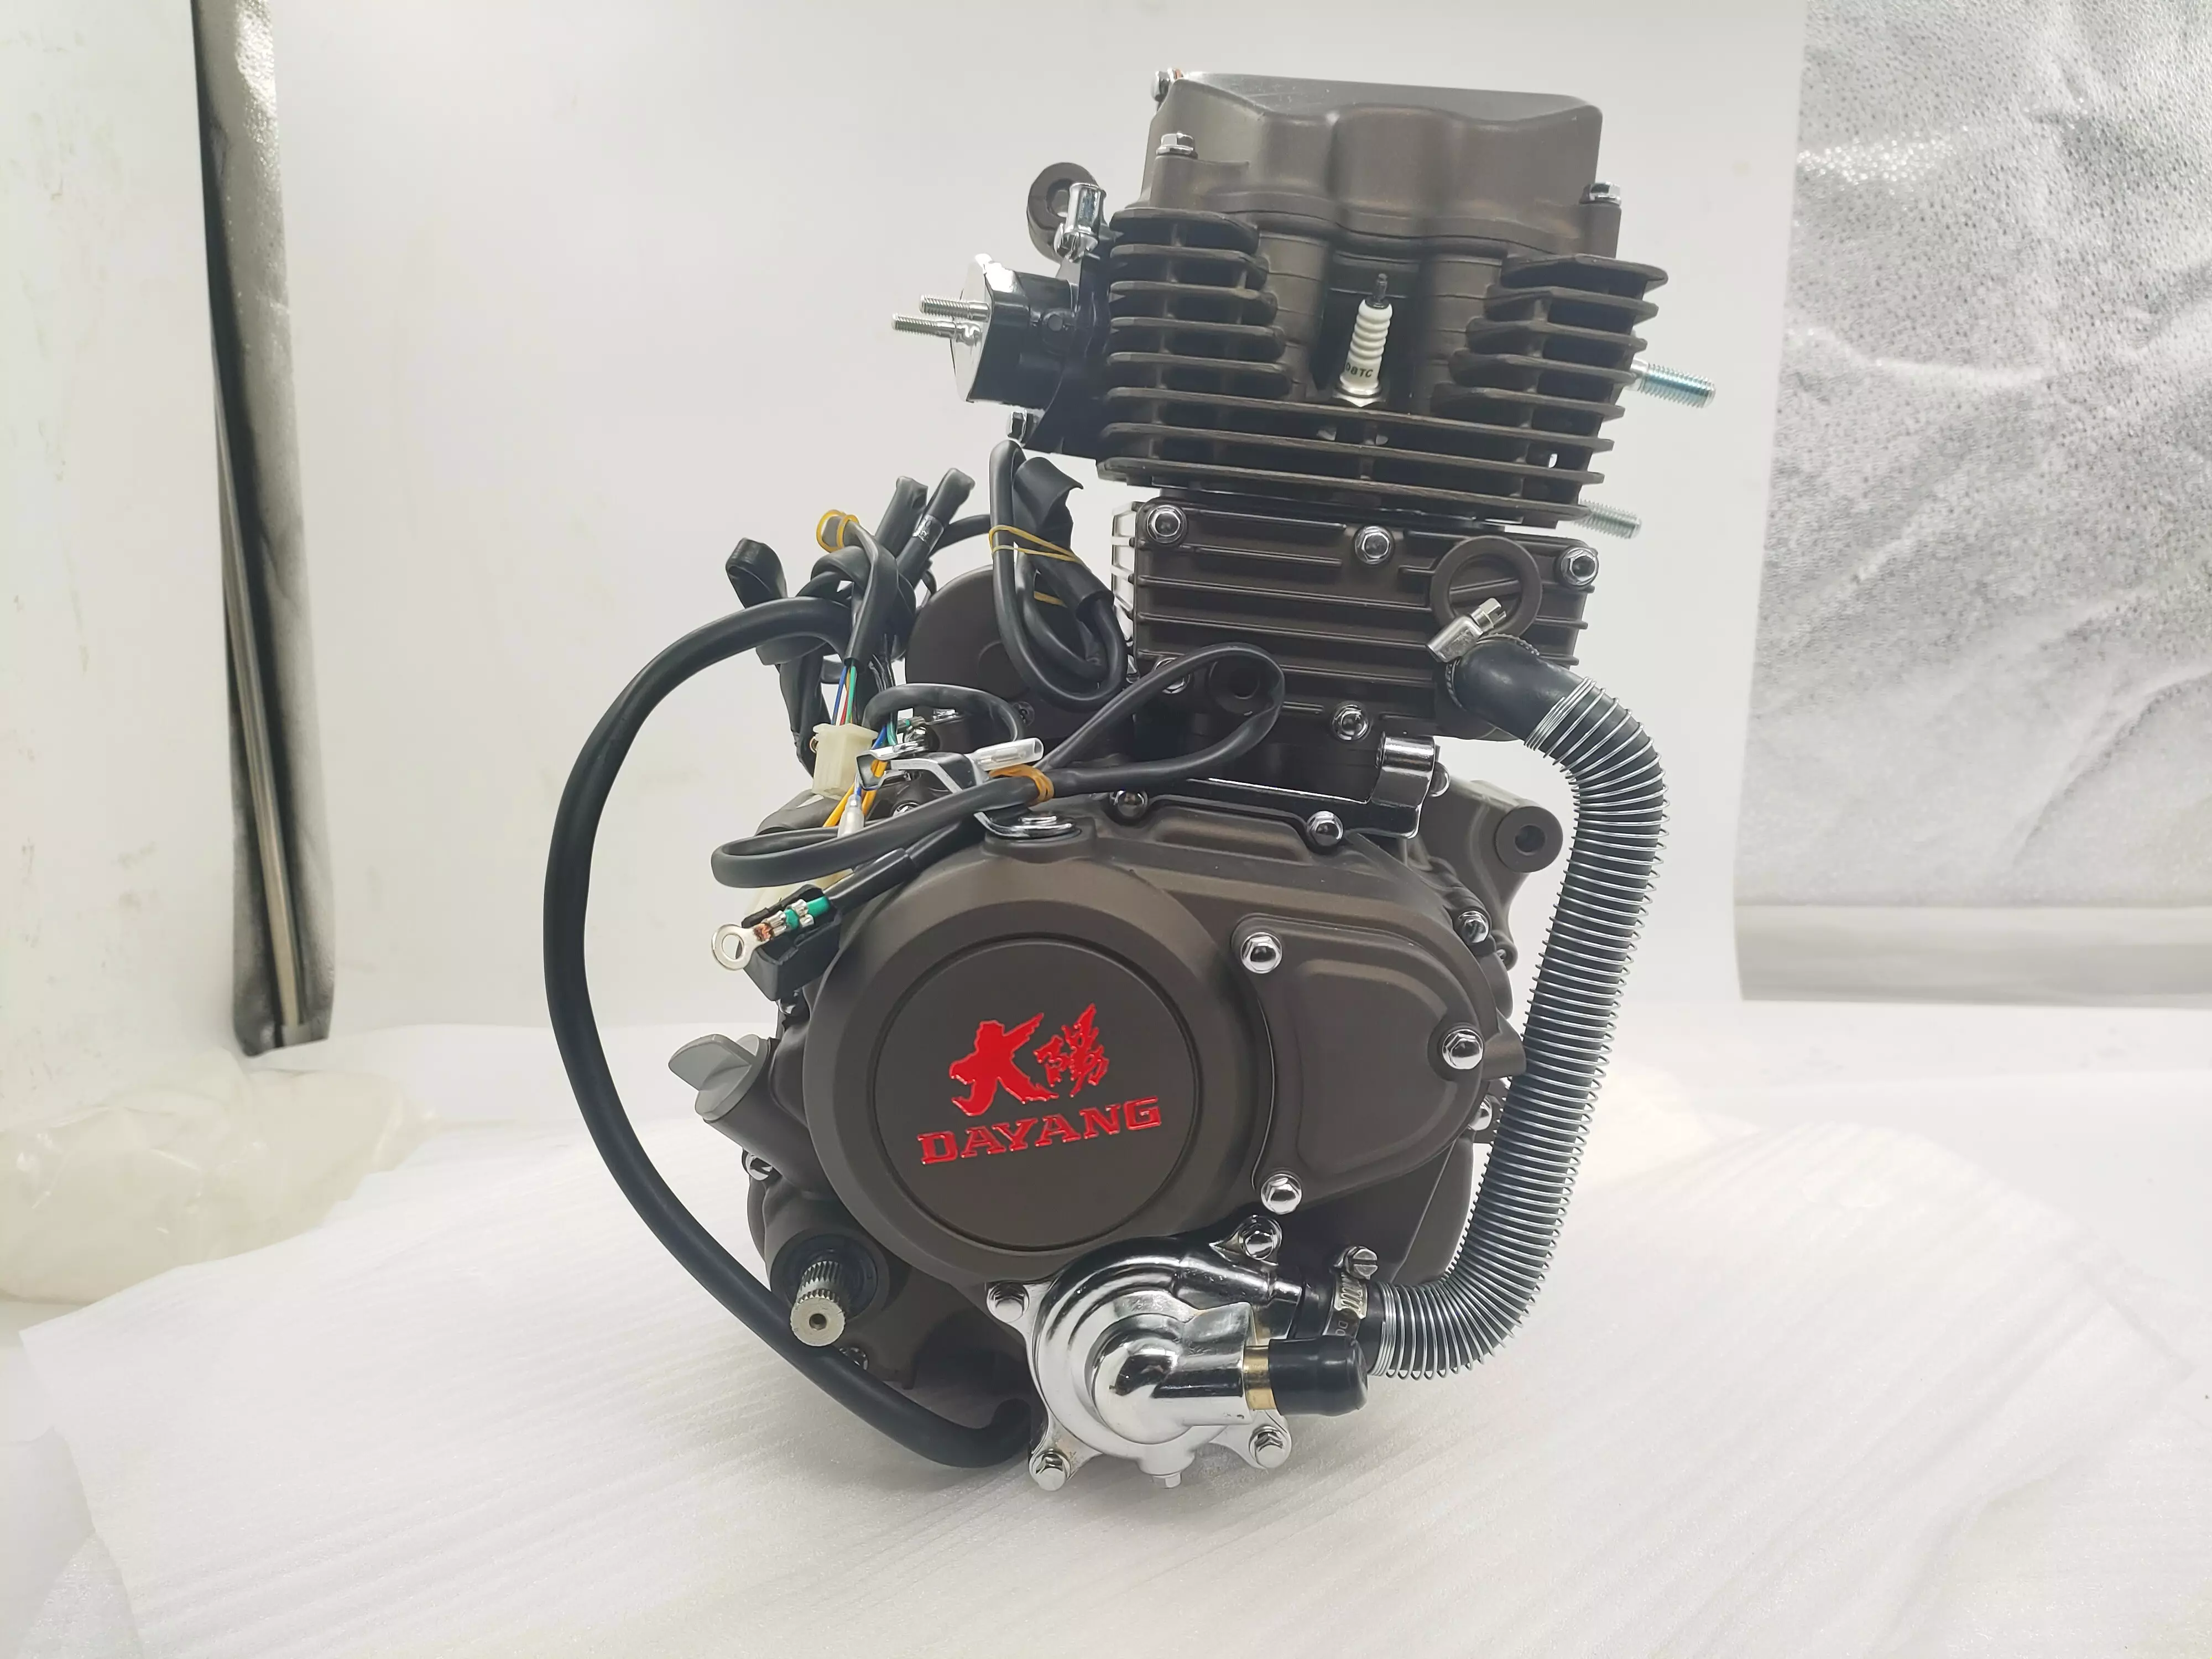 DAYANG LIFAN CG175cc Cool with the  pump Motorcycle Engine Assembly Single Cylinder Four Stroke Style China CCC Origin Type